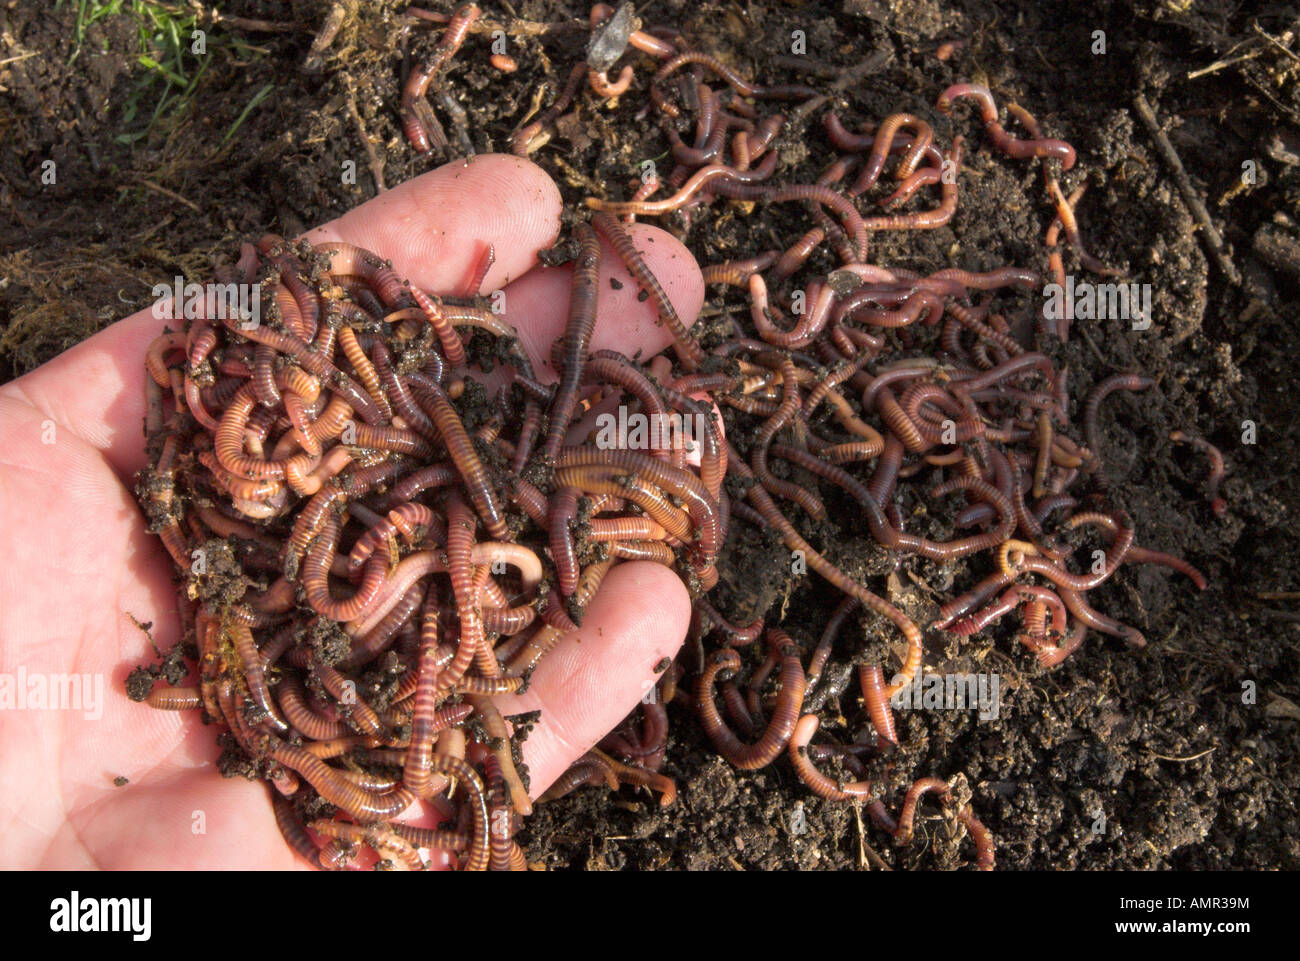 Compost Worms On A Hand With In A Garden Home Wormery Stock Photo